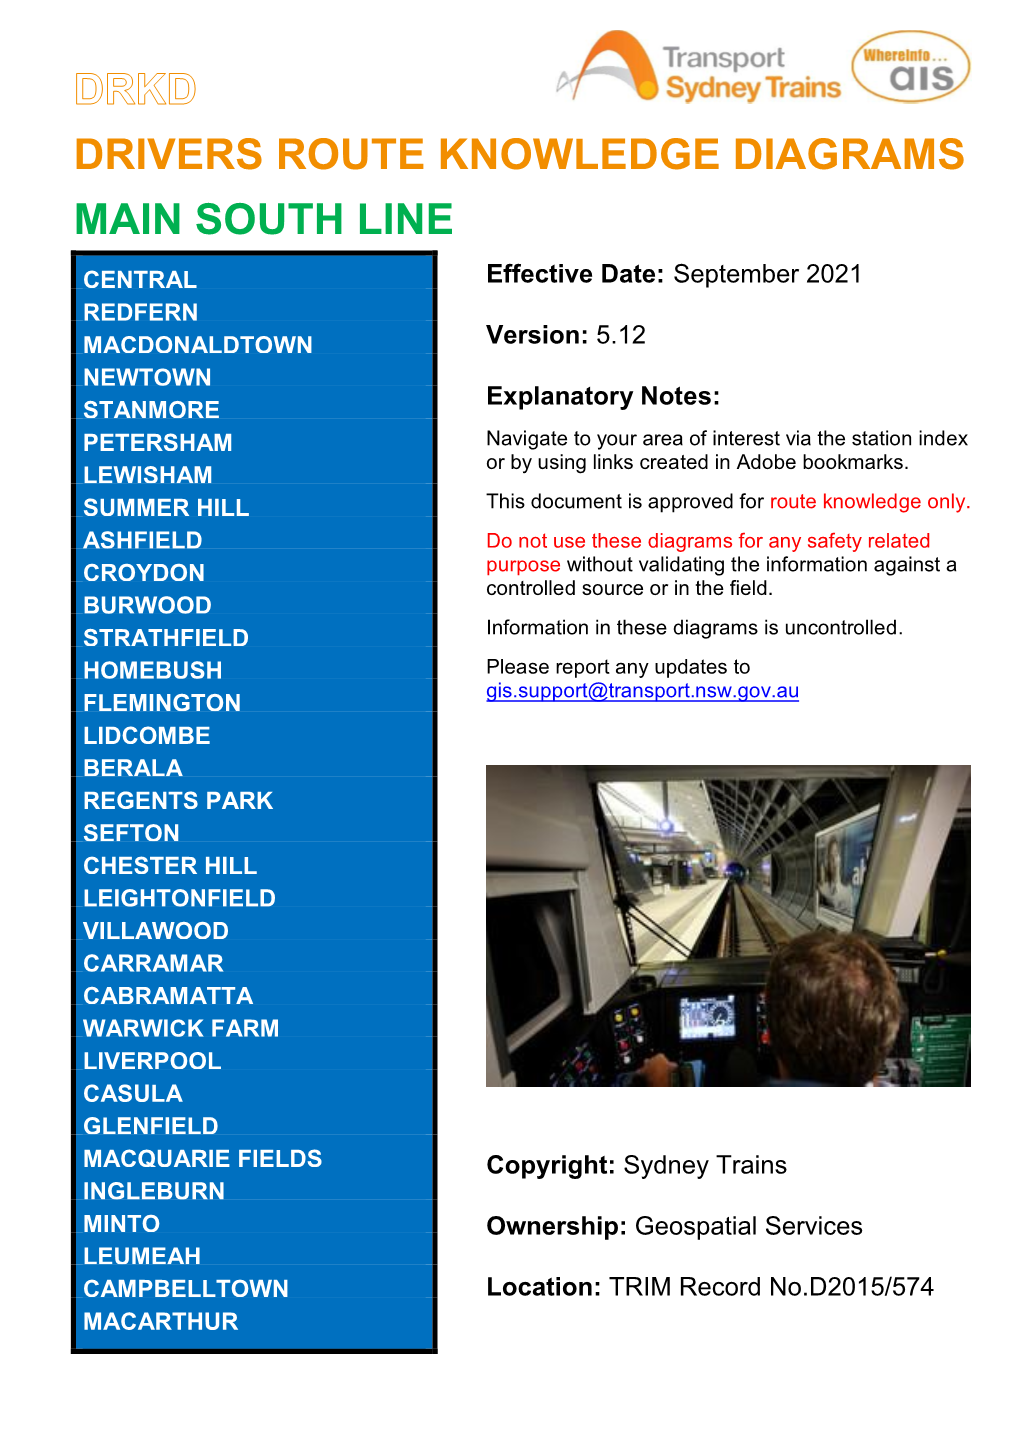 DRIVERS ROUTE KNOWLEDGE DIAGRAMS MAIN SOUTH LINE CENTRAL Effective Date: September 2021 REDFERN